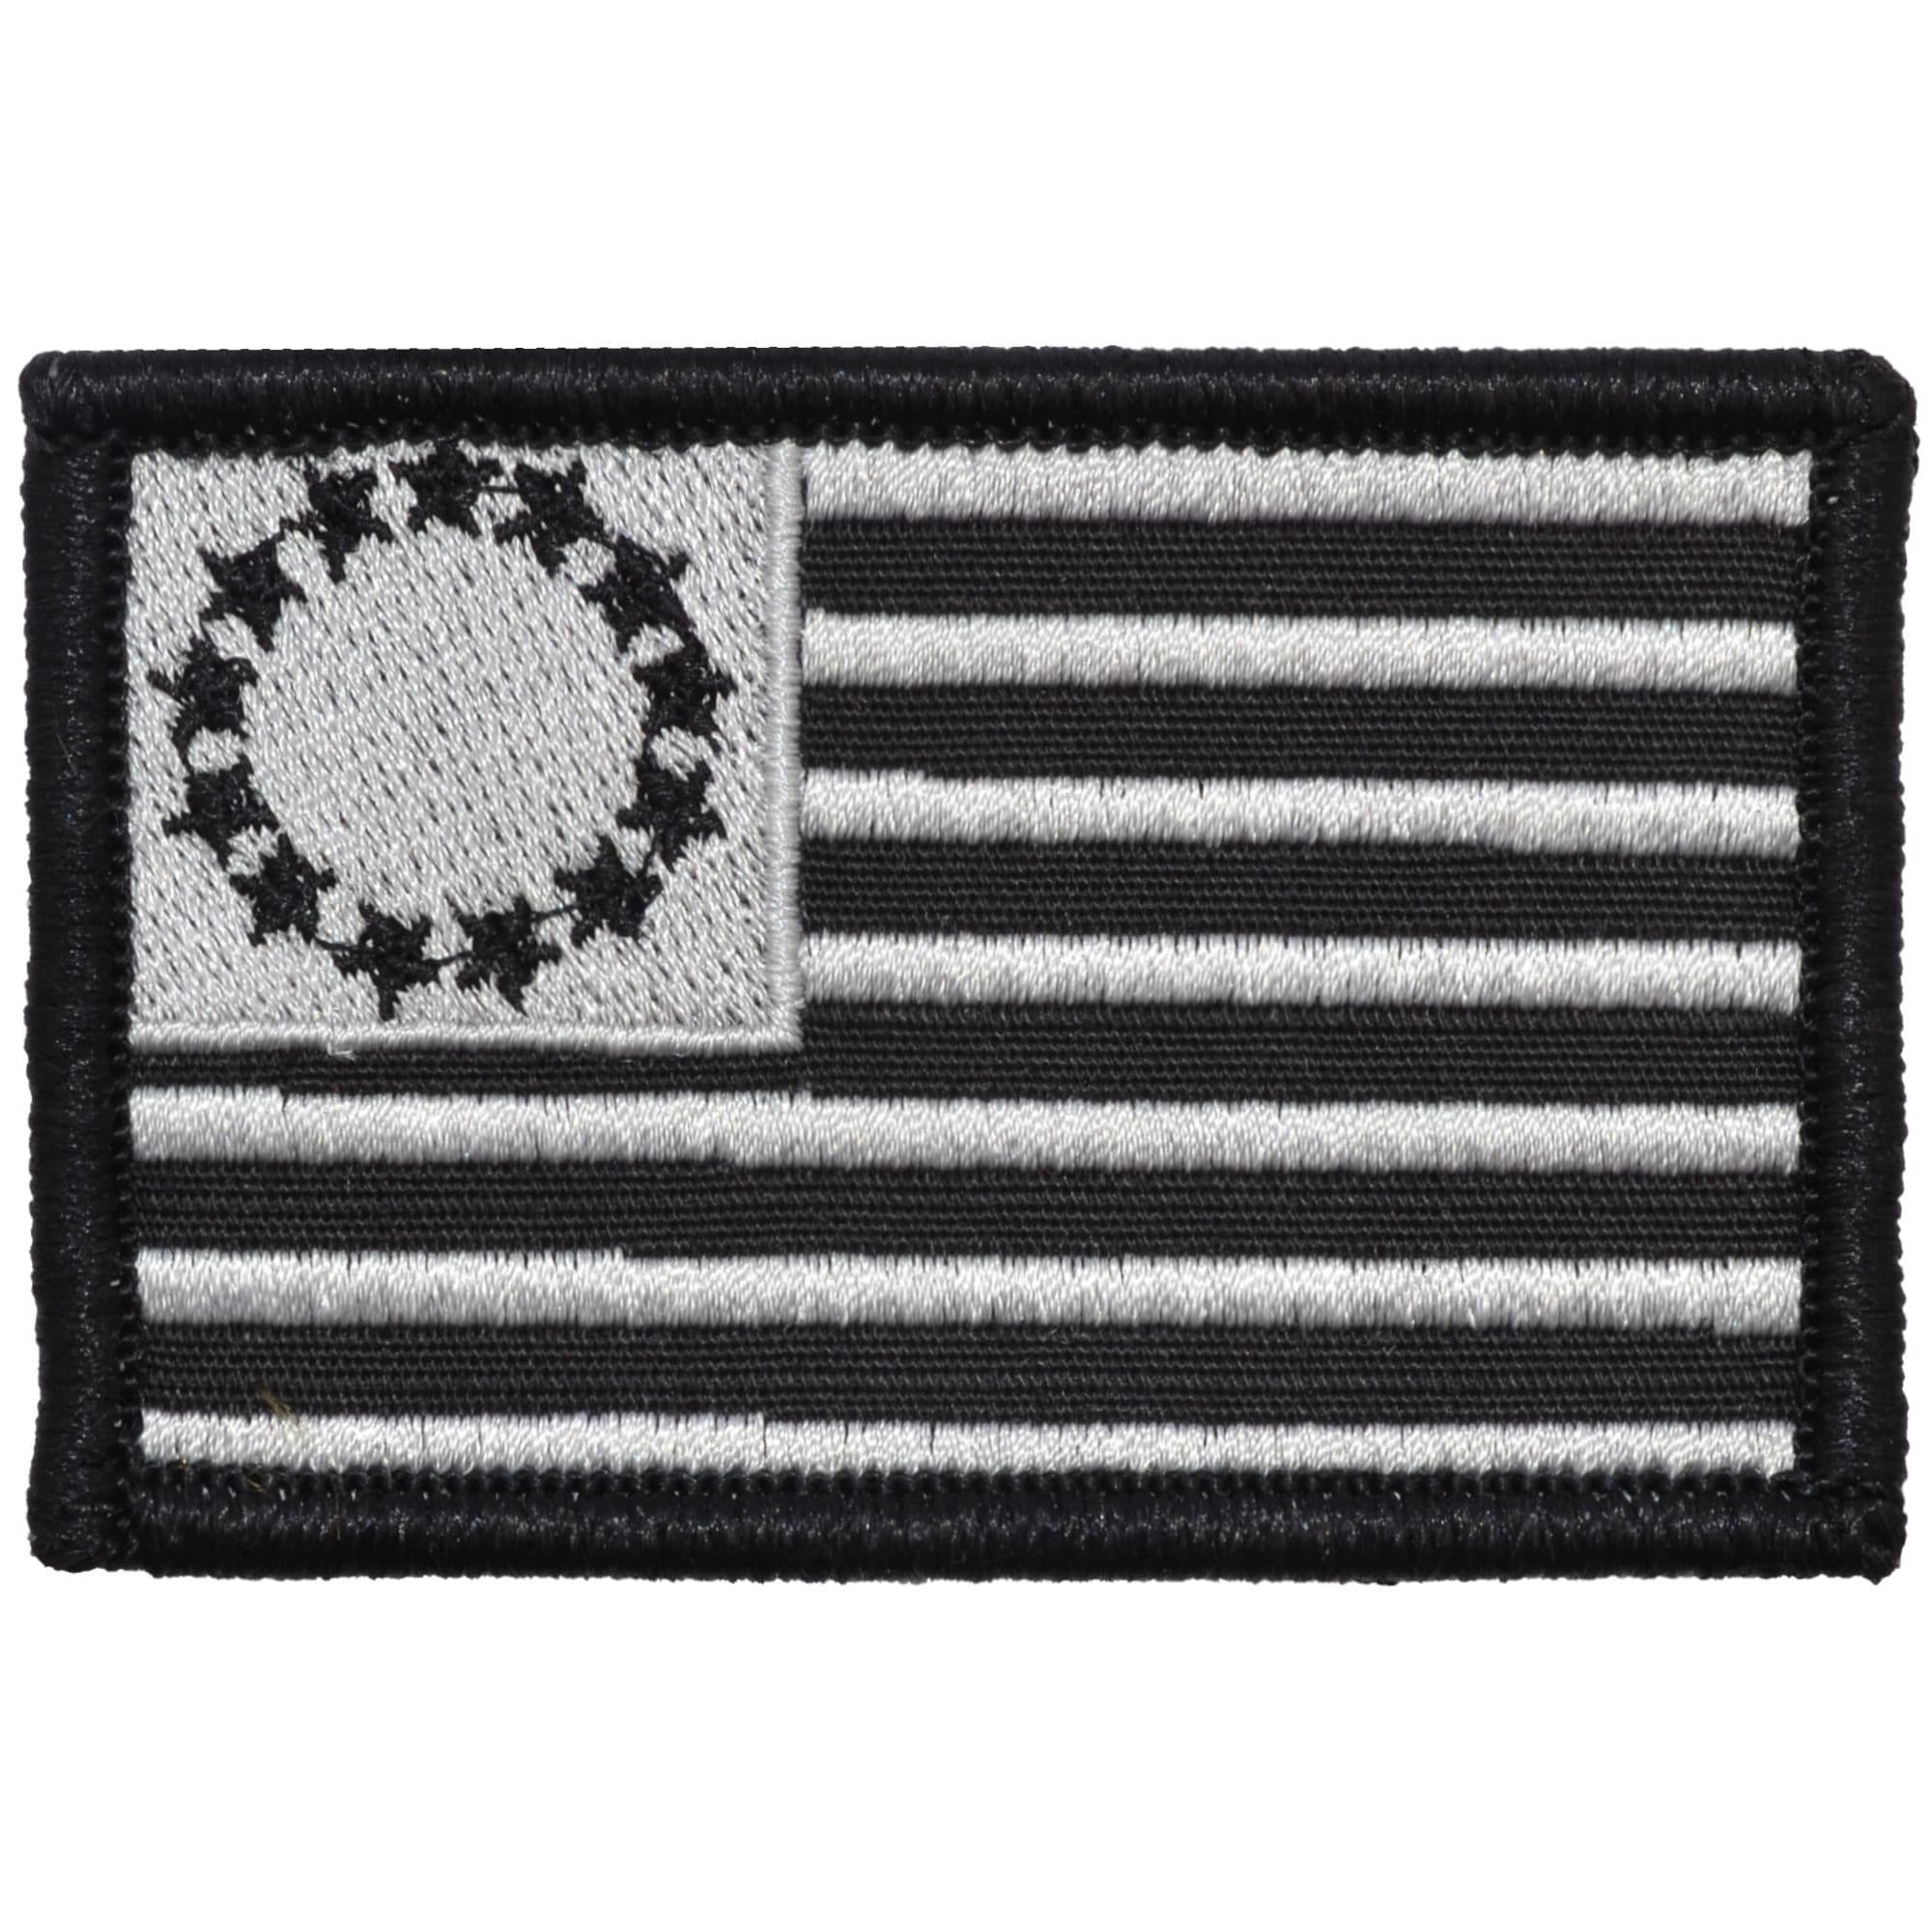 Tactical Gear Junkie Patches Black Betsy Ross Flag - 2x3 Patch